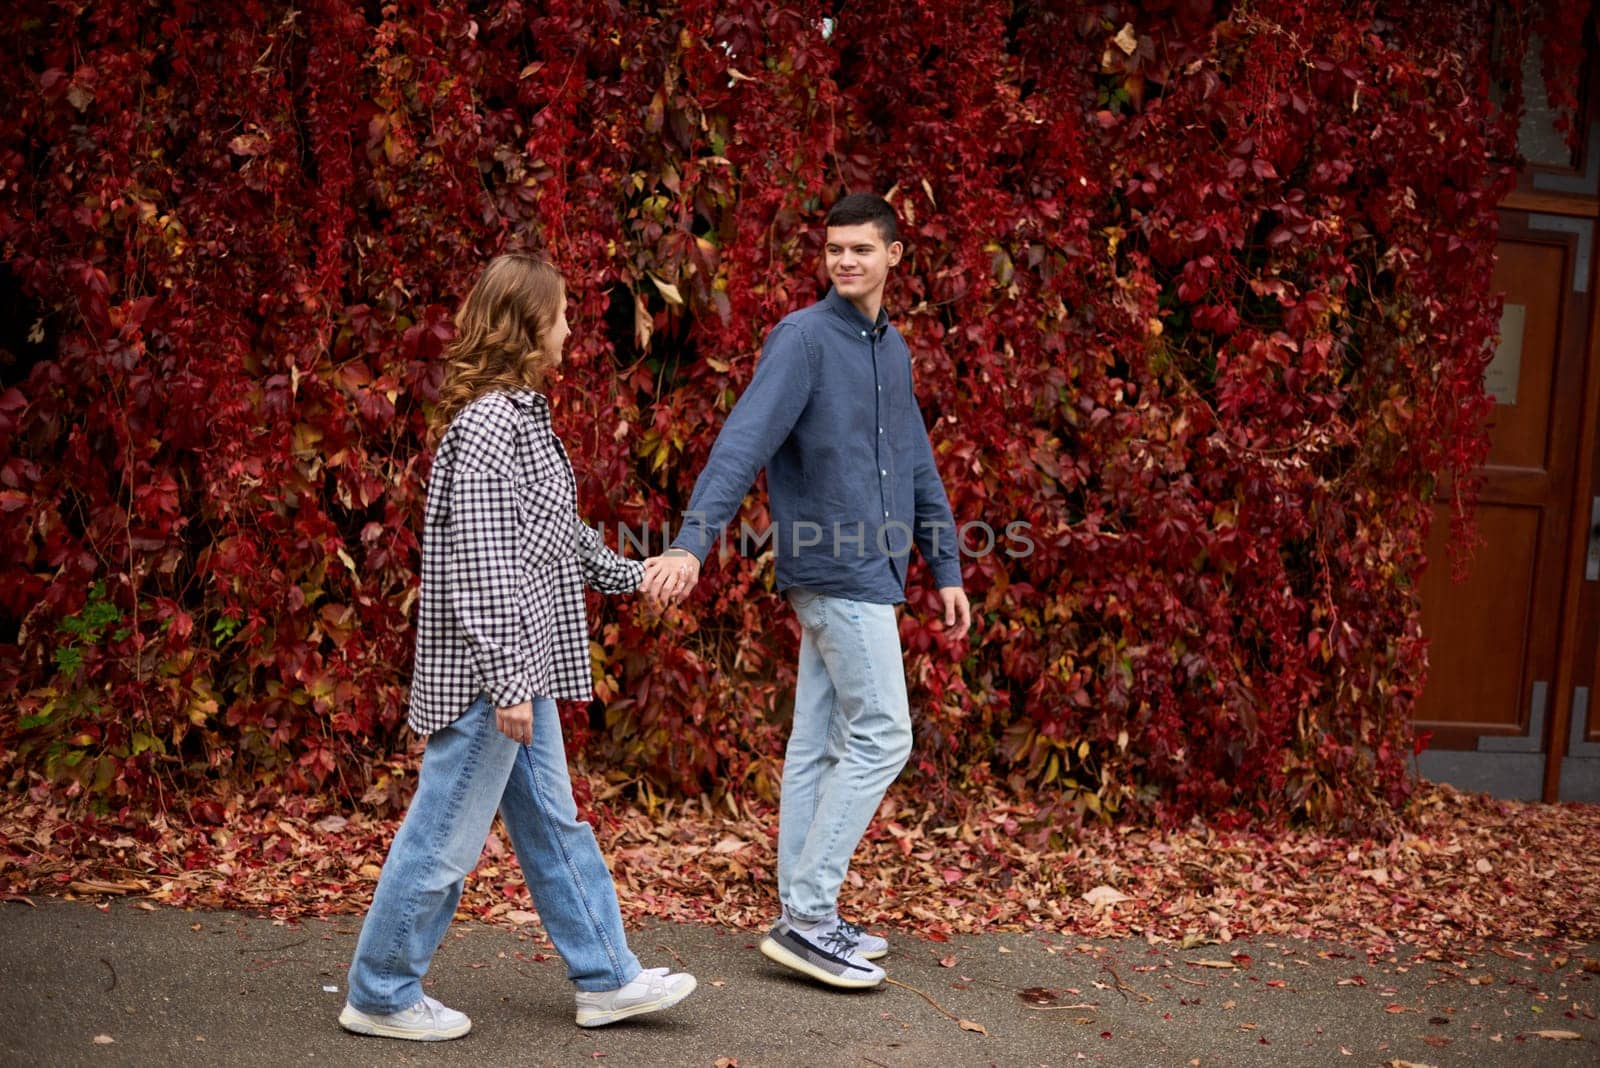 Warm Embrace of Teen Love in the Autumn Park. Capturing Teen Moments: Love Blossoms in Autumn's Embrace. Teenagers in Love: Embracing the Autumn Vibe by Andrii_Ko